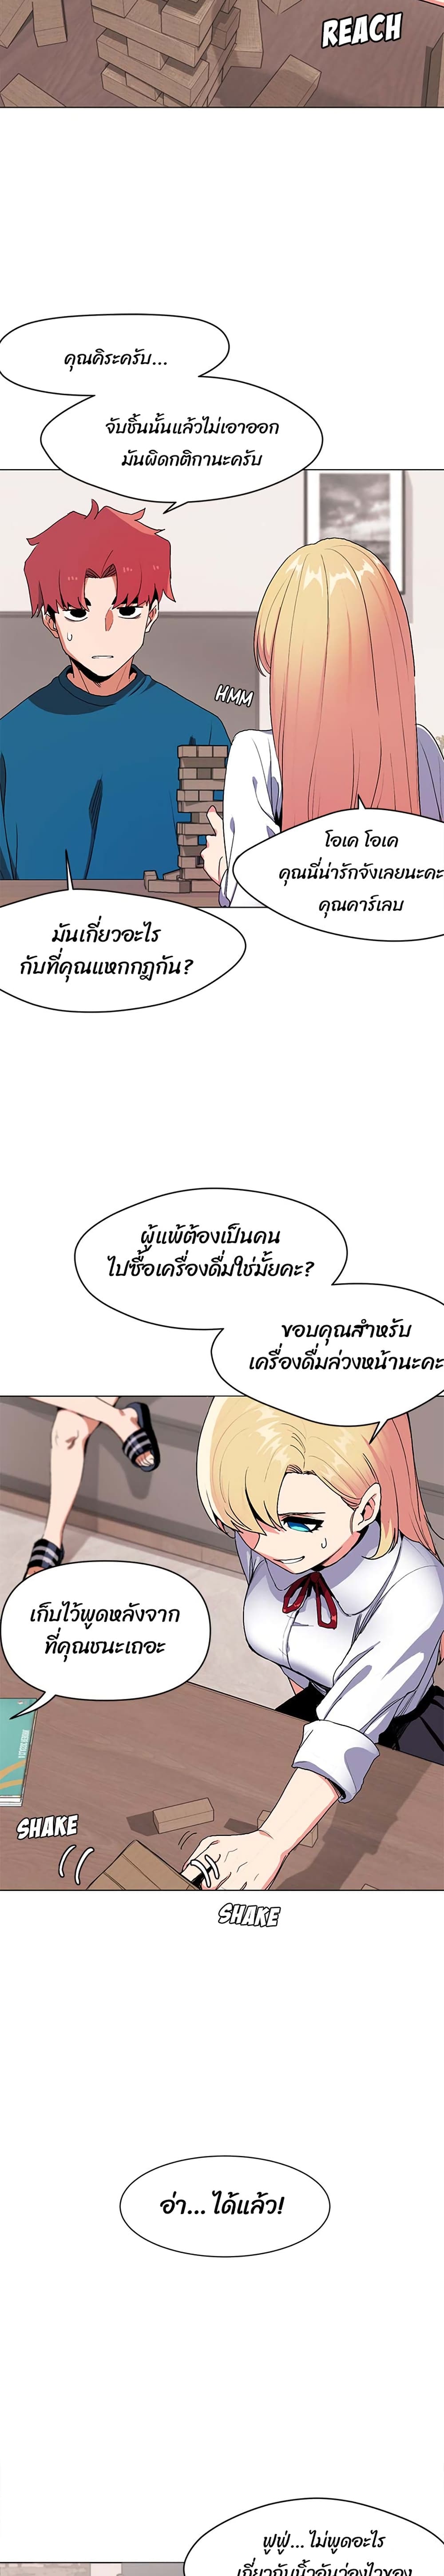 College Life Starts With Clubs 1 ภาพที่ 17